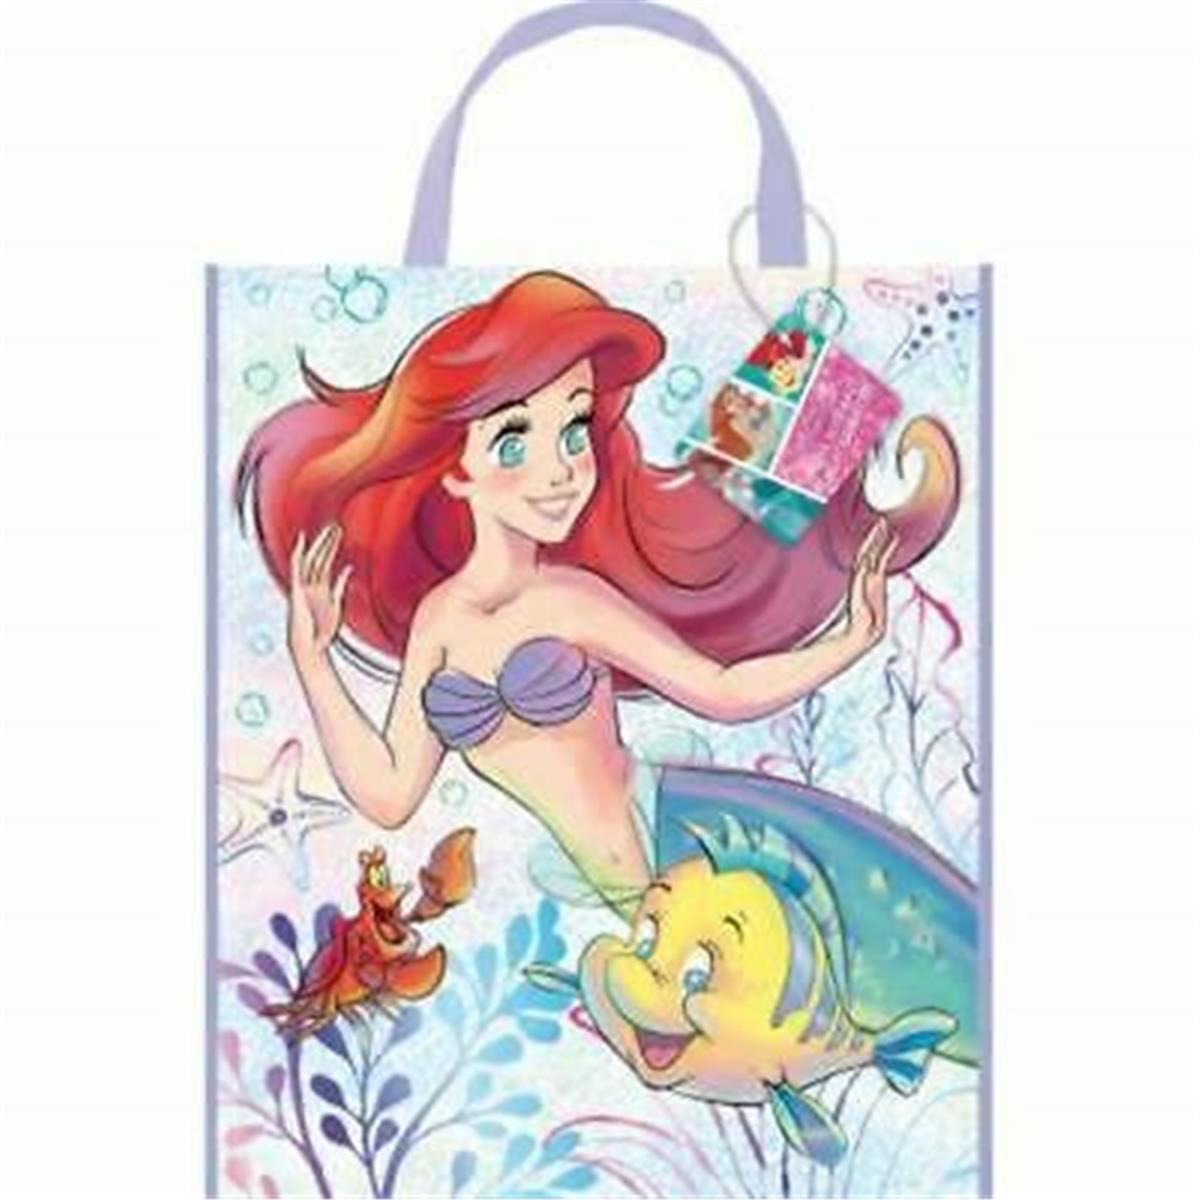 310006 The Little Mermaid Party Tote Bag